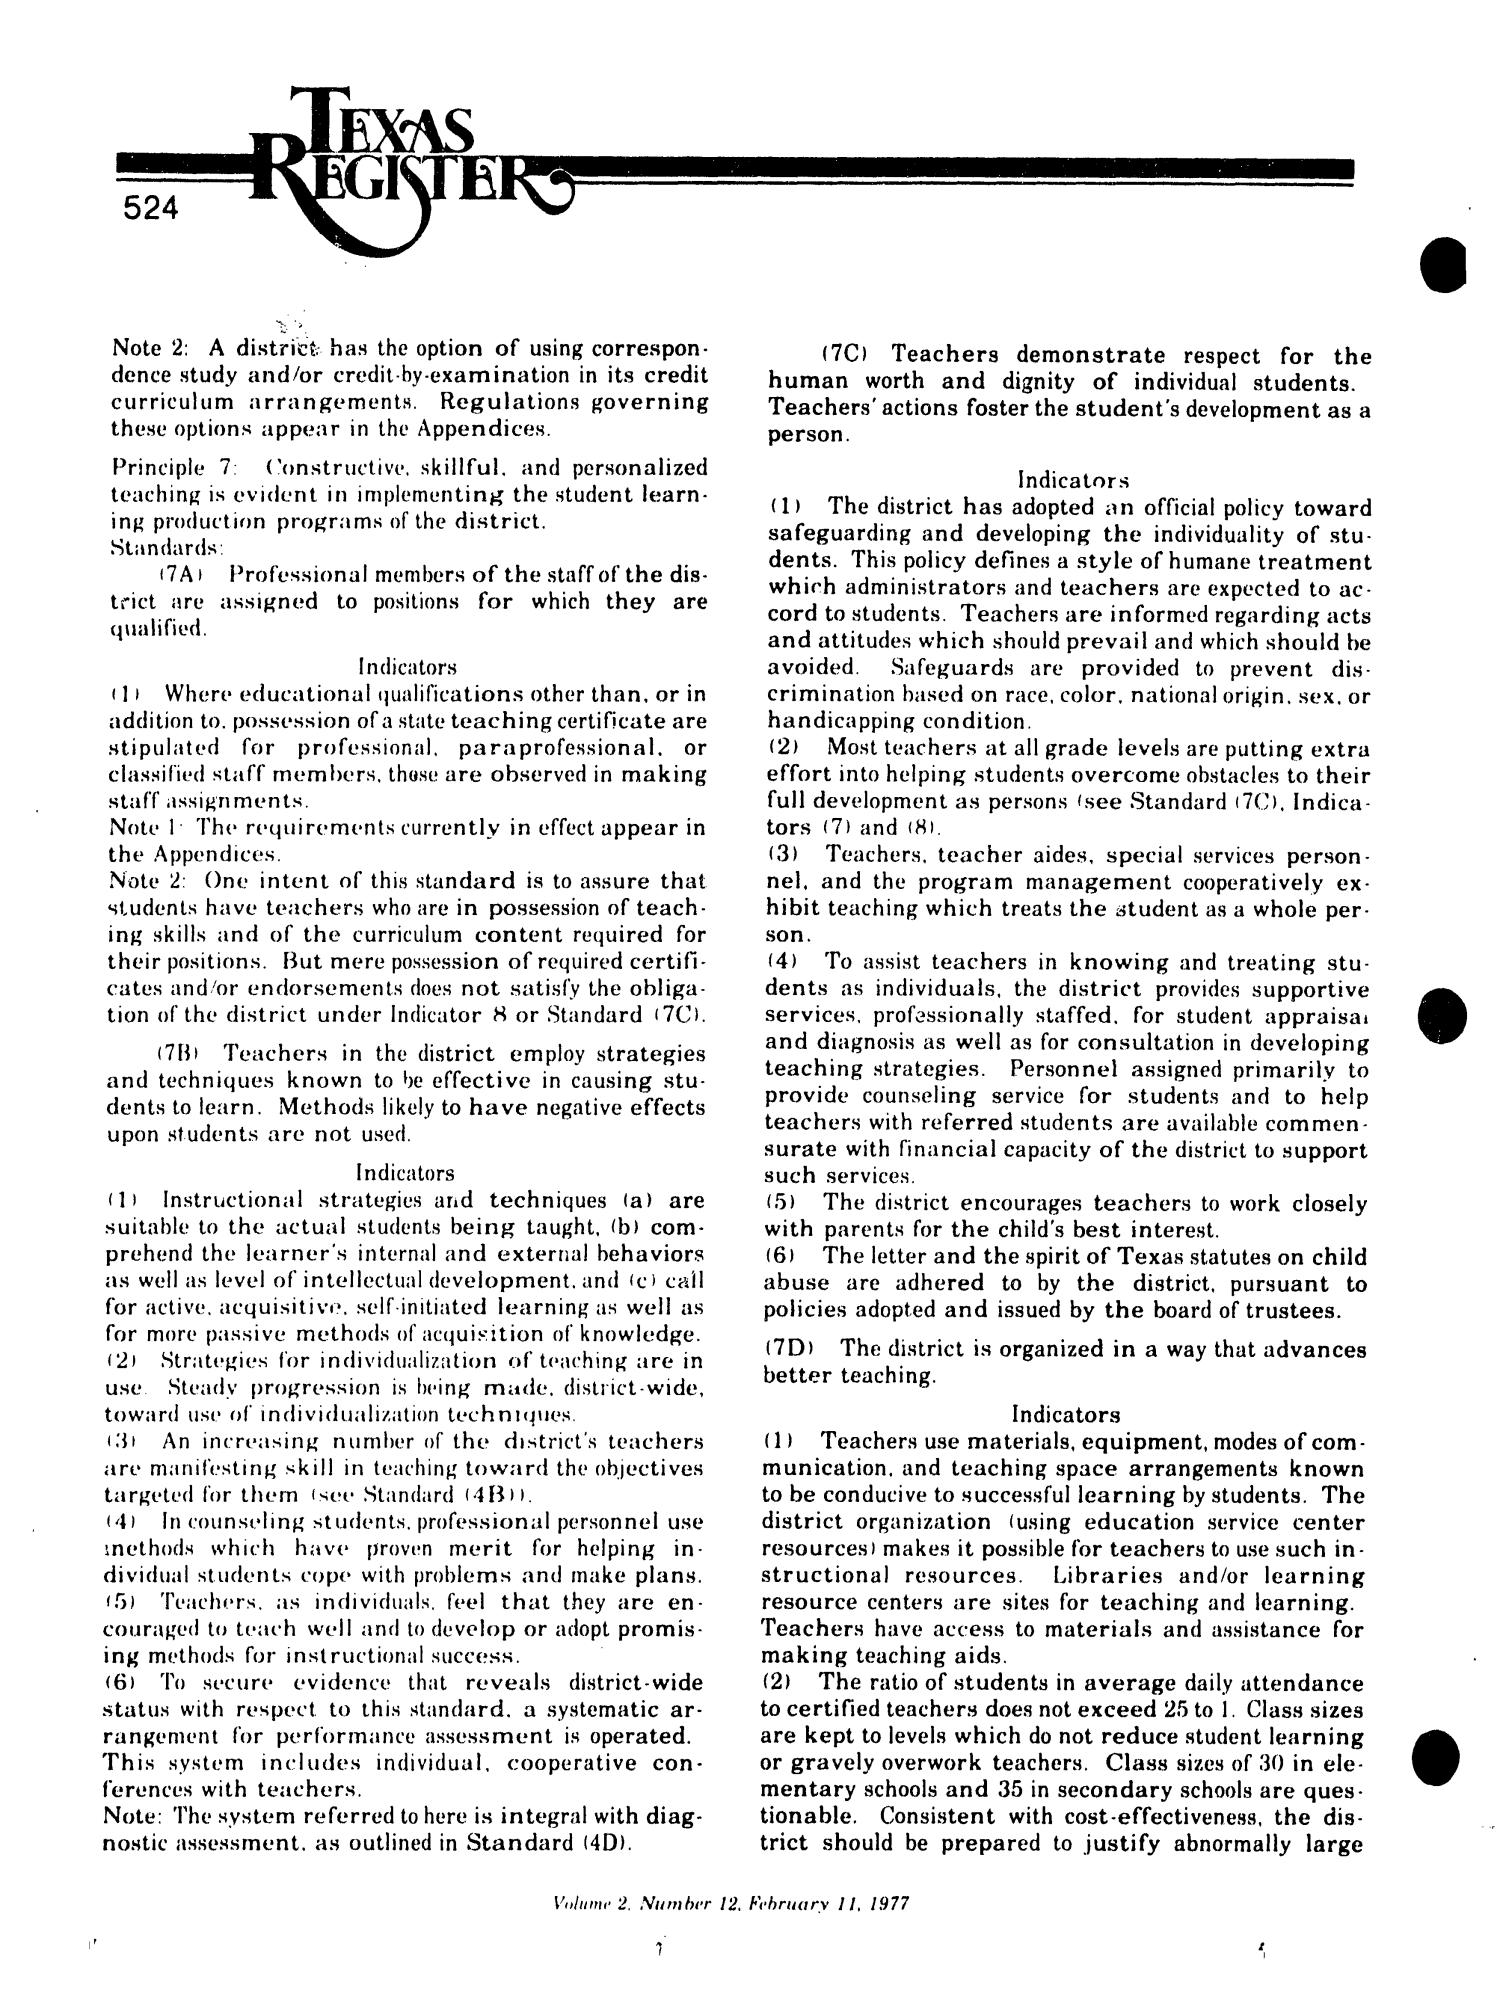 Texas Register, Volume 2, Number 12, Pages 507-562, February 11, 1977
                                                
                                                    524
                                                